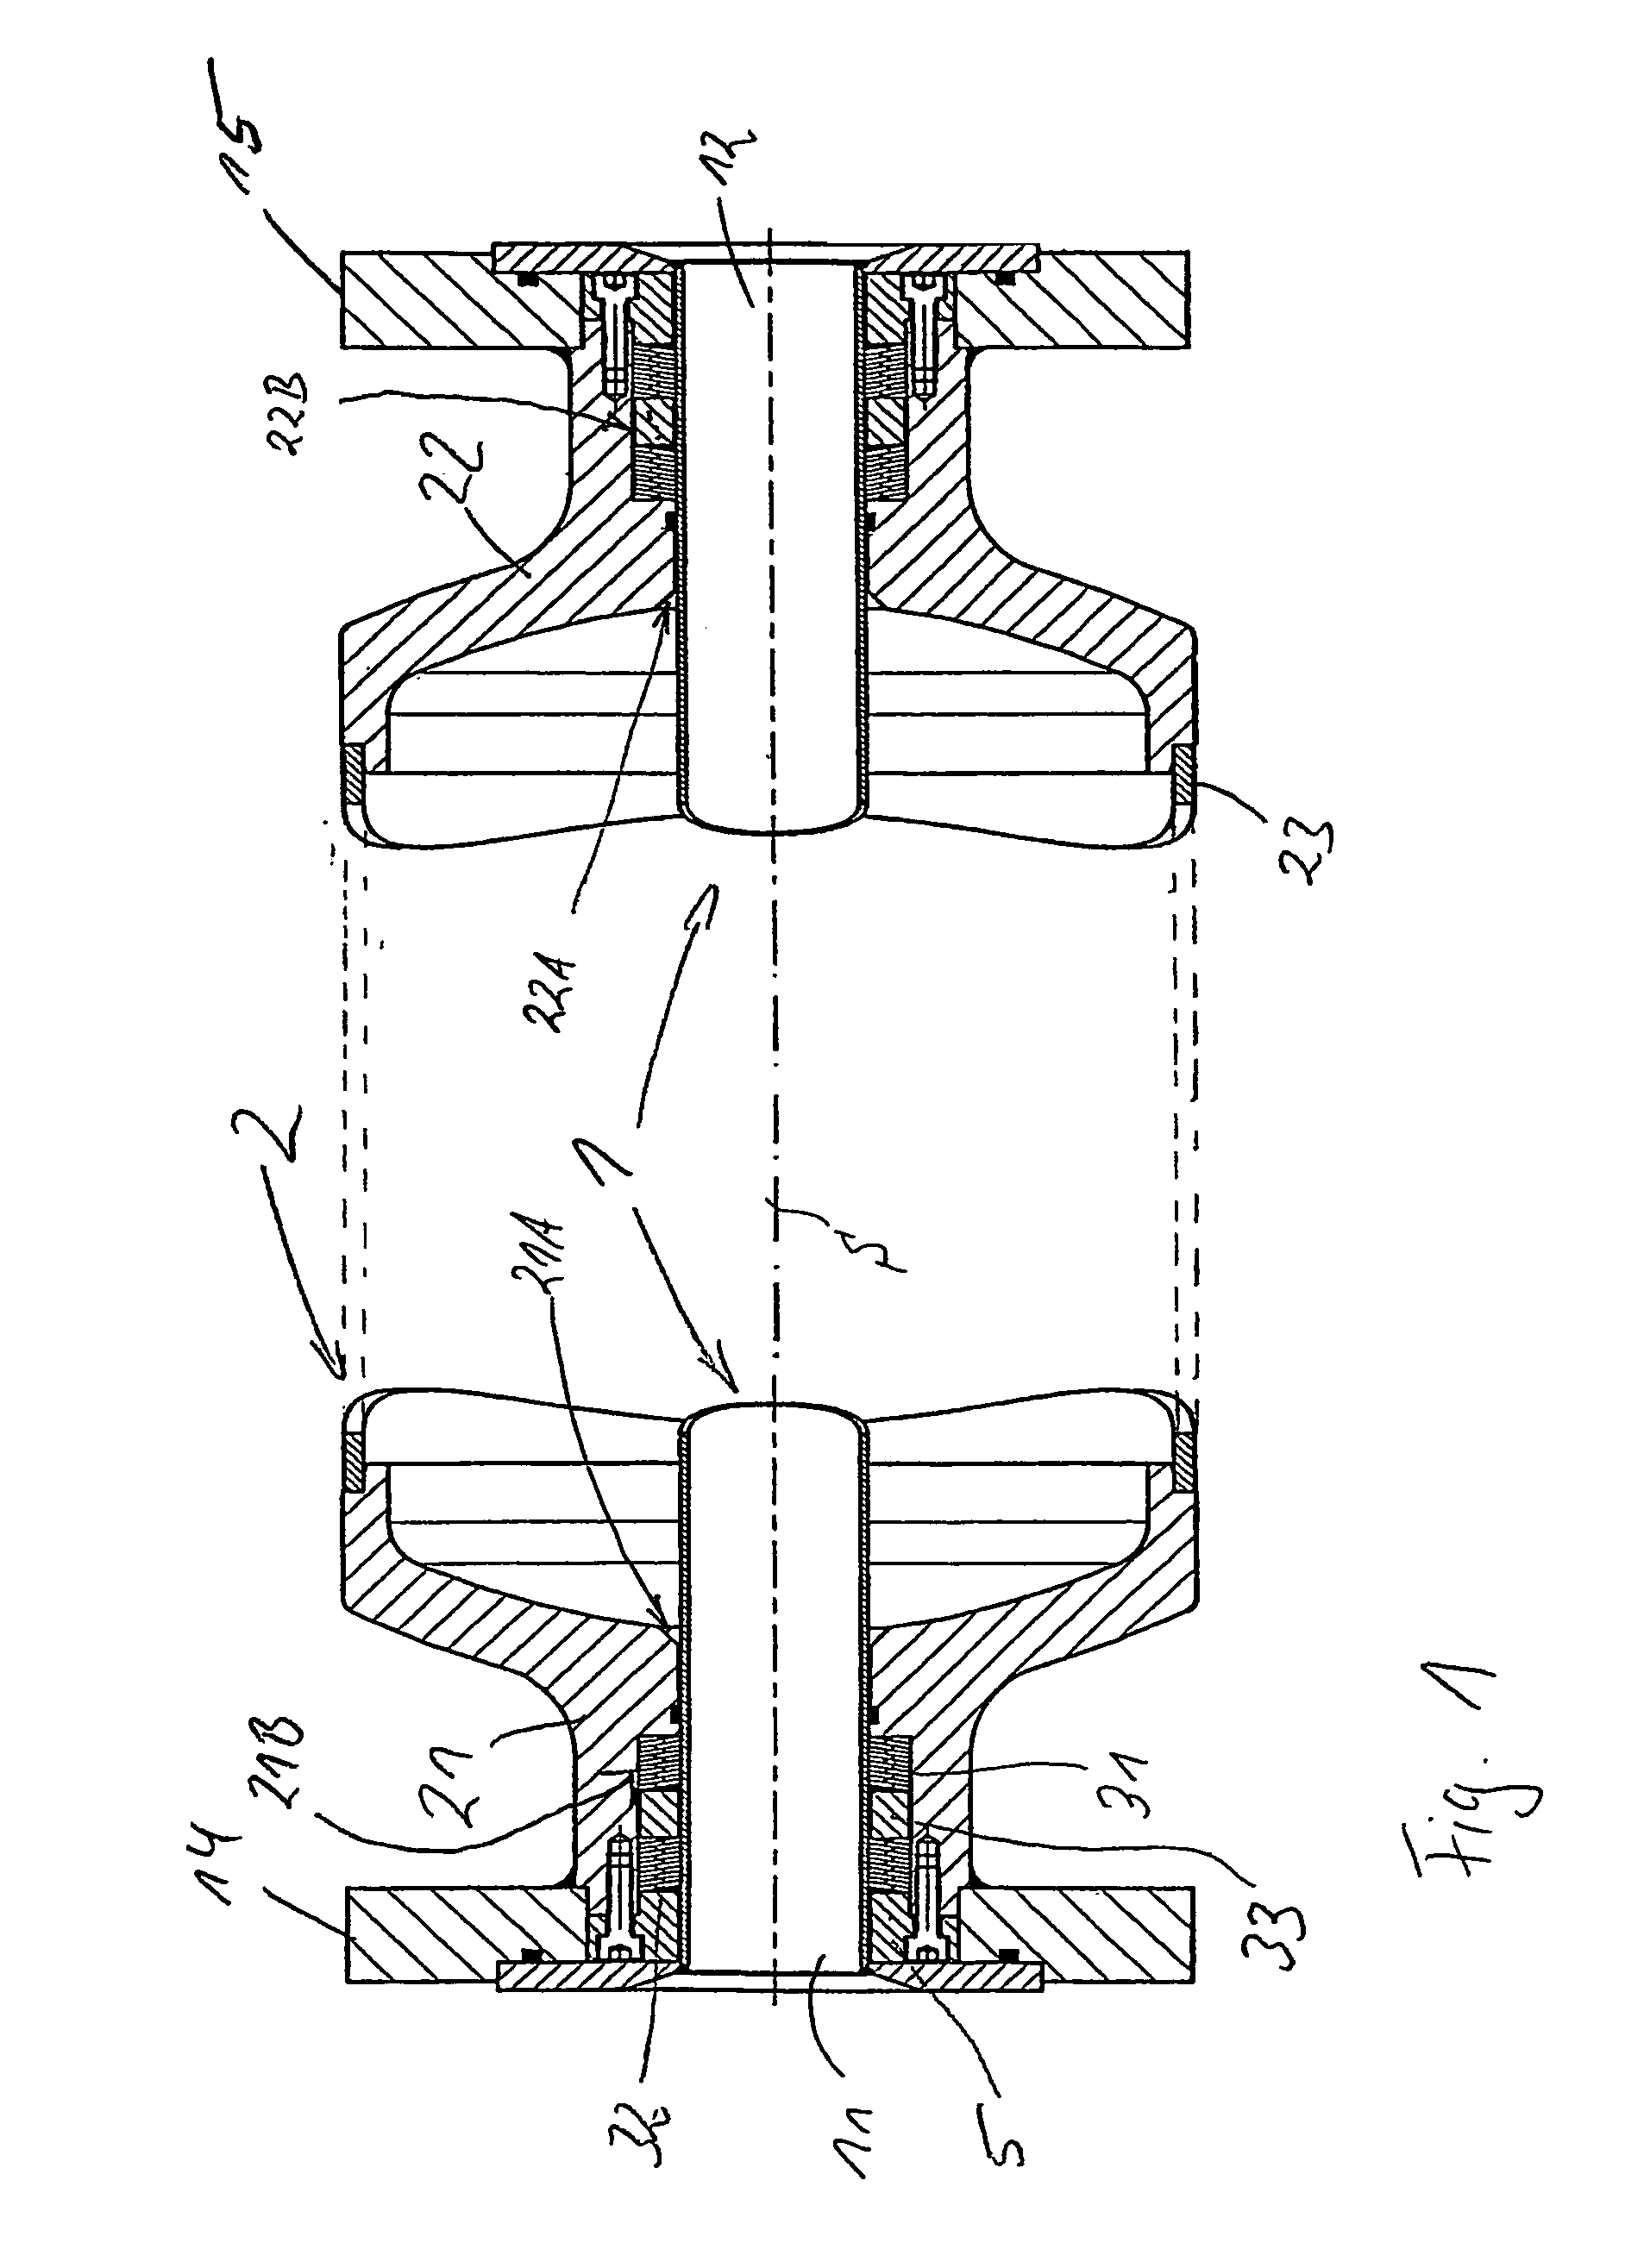 Vibration-type measurement pickup and its measuring tube